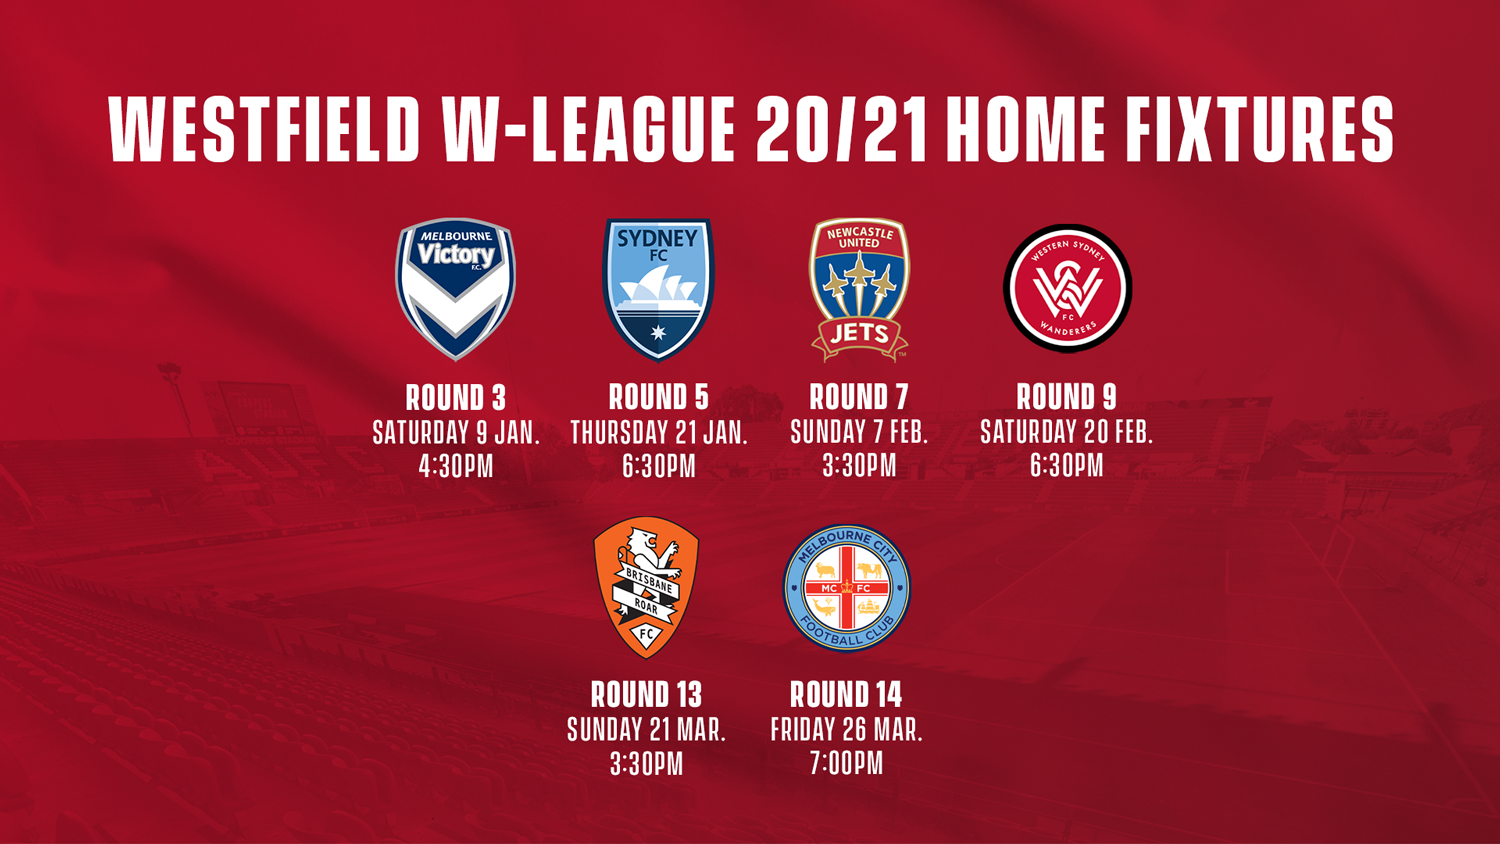 Adelaide United Women home fixtures 2020/21